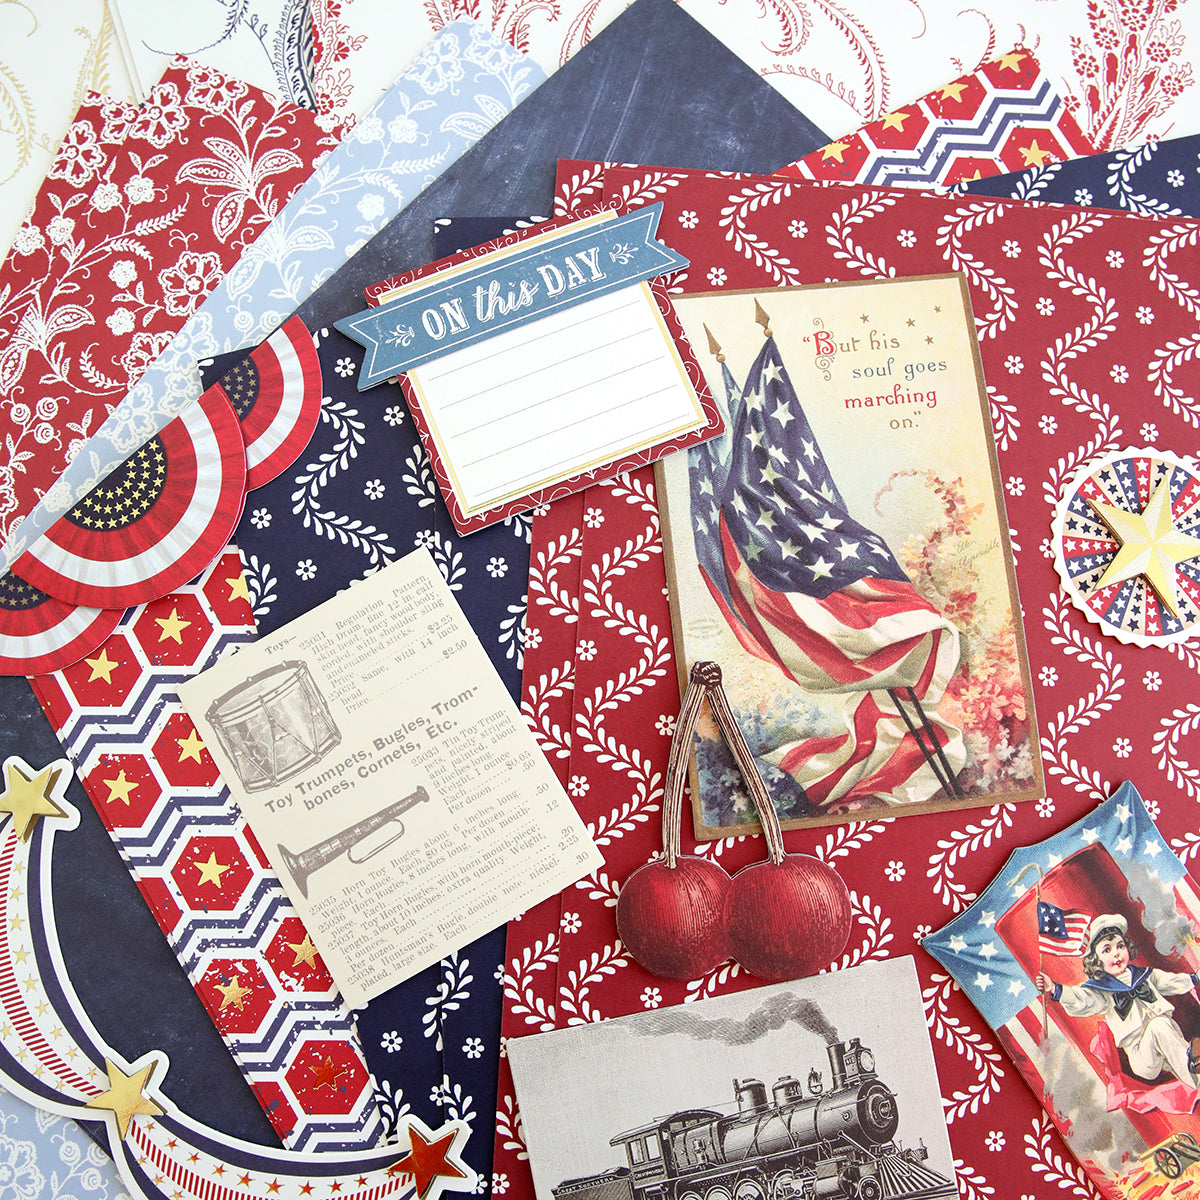 Vintage-inspired 4th of July scrapbooking kit featuring the Madison Paper Crafting Collection and cherry red accents.